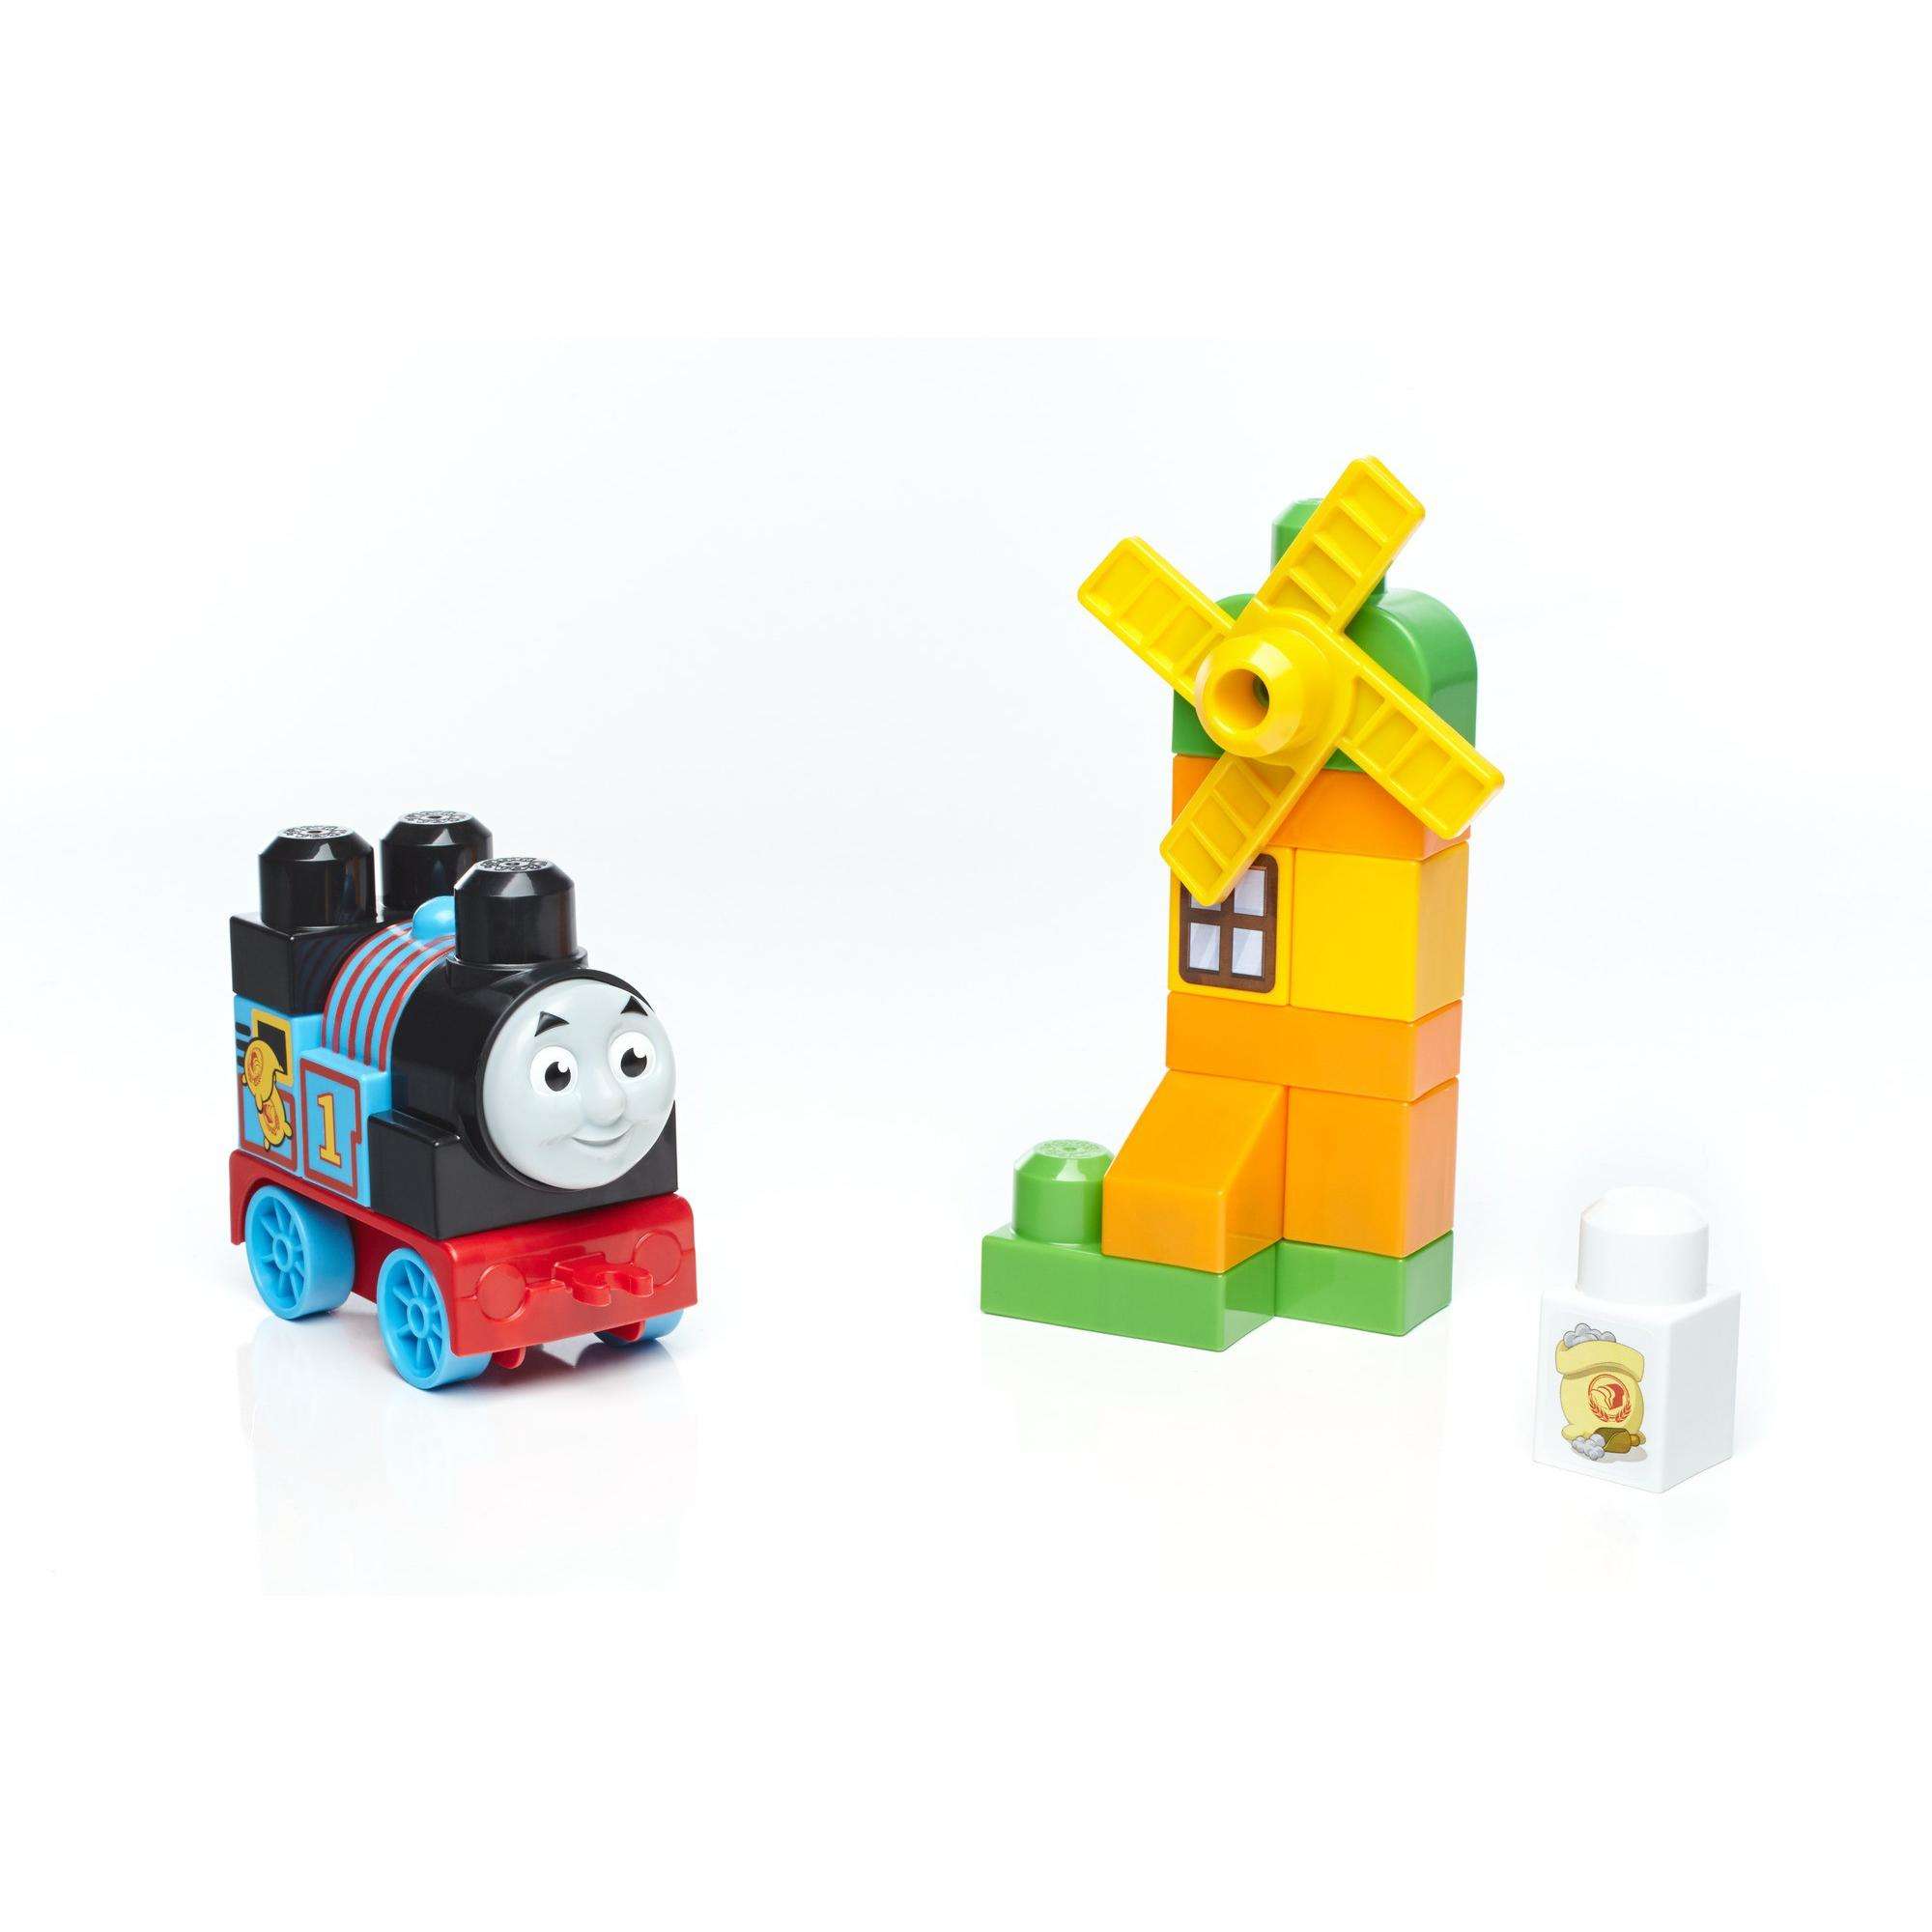 Mega Bloks Thomas & Friends McColl's Farm with Percy Buildable Set - image 5 of 6